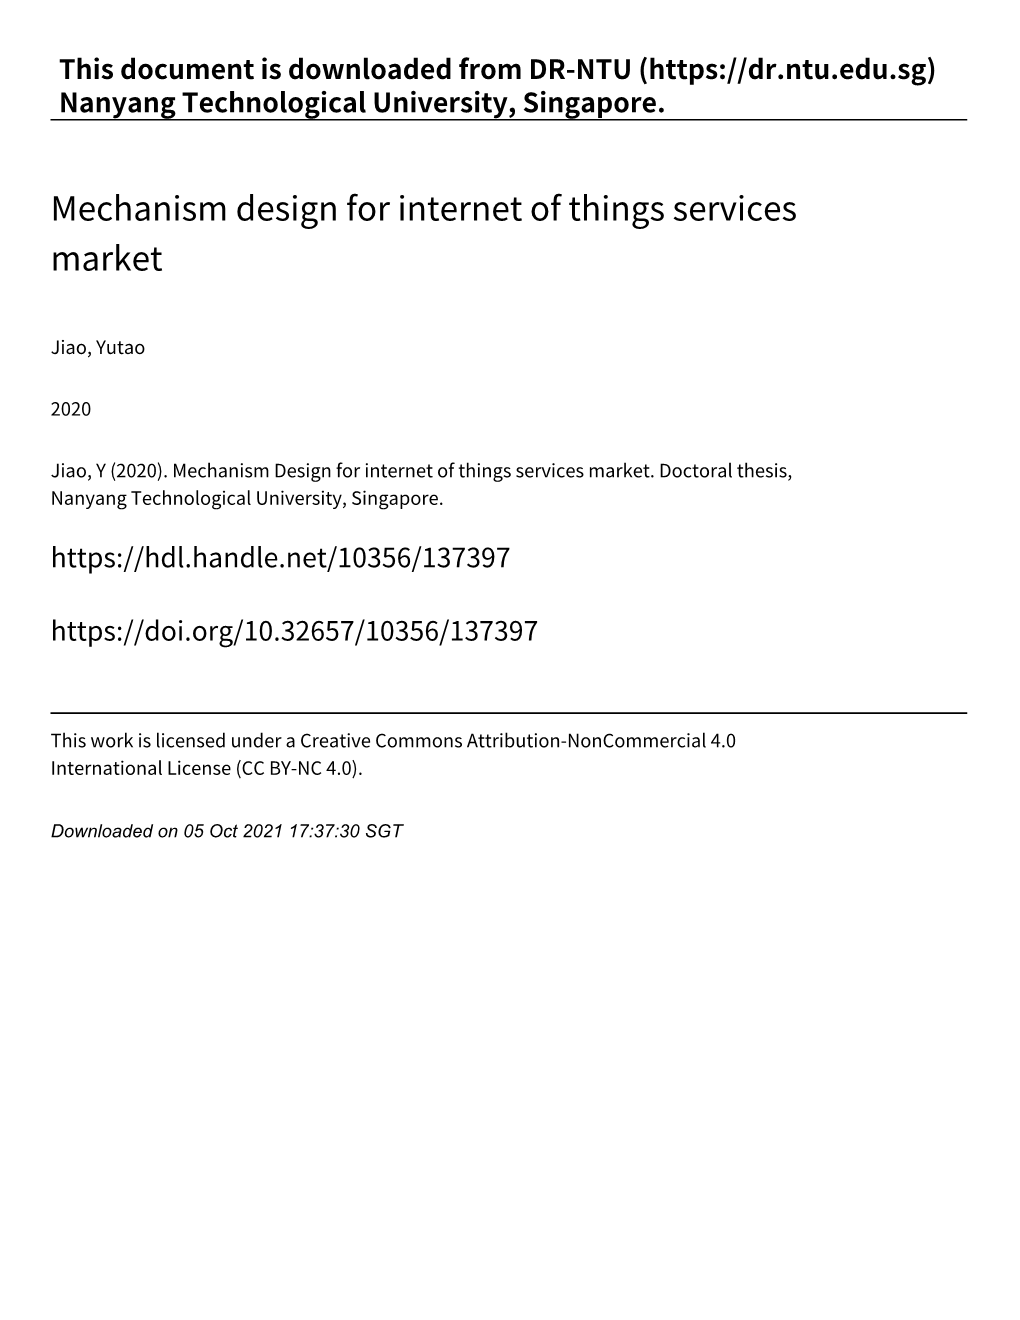 Mechanism Design for Internet of Things Services Market